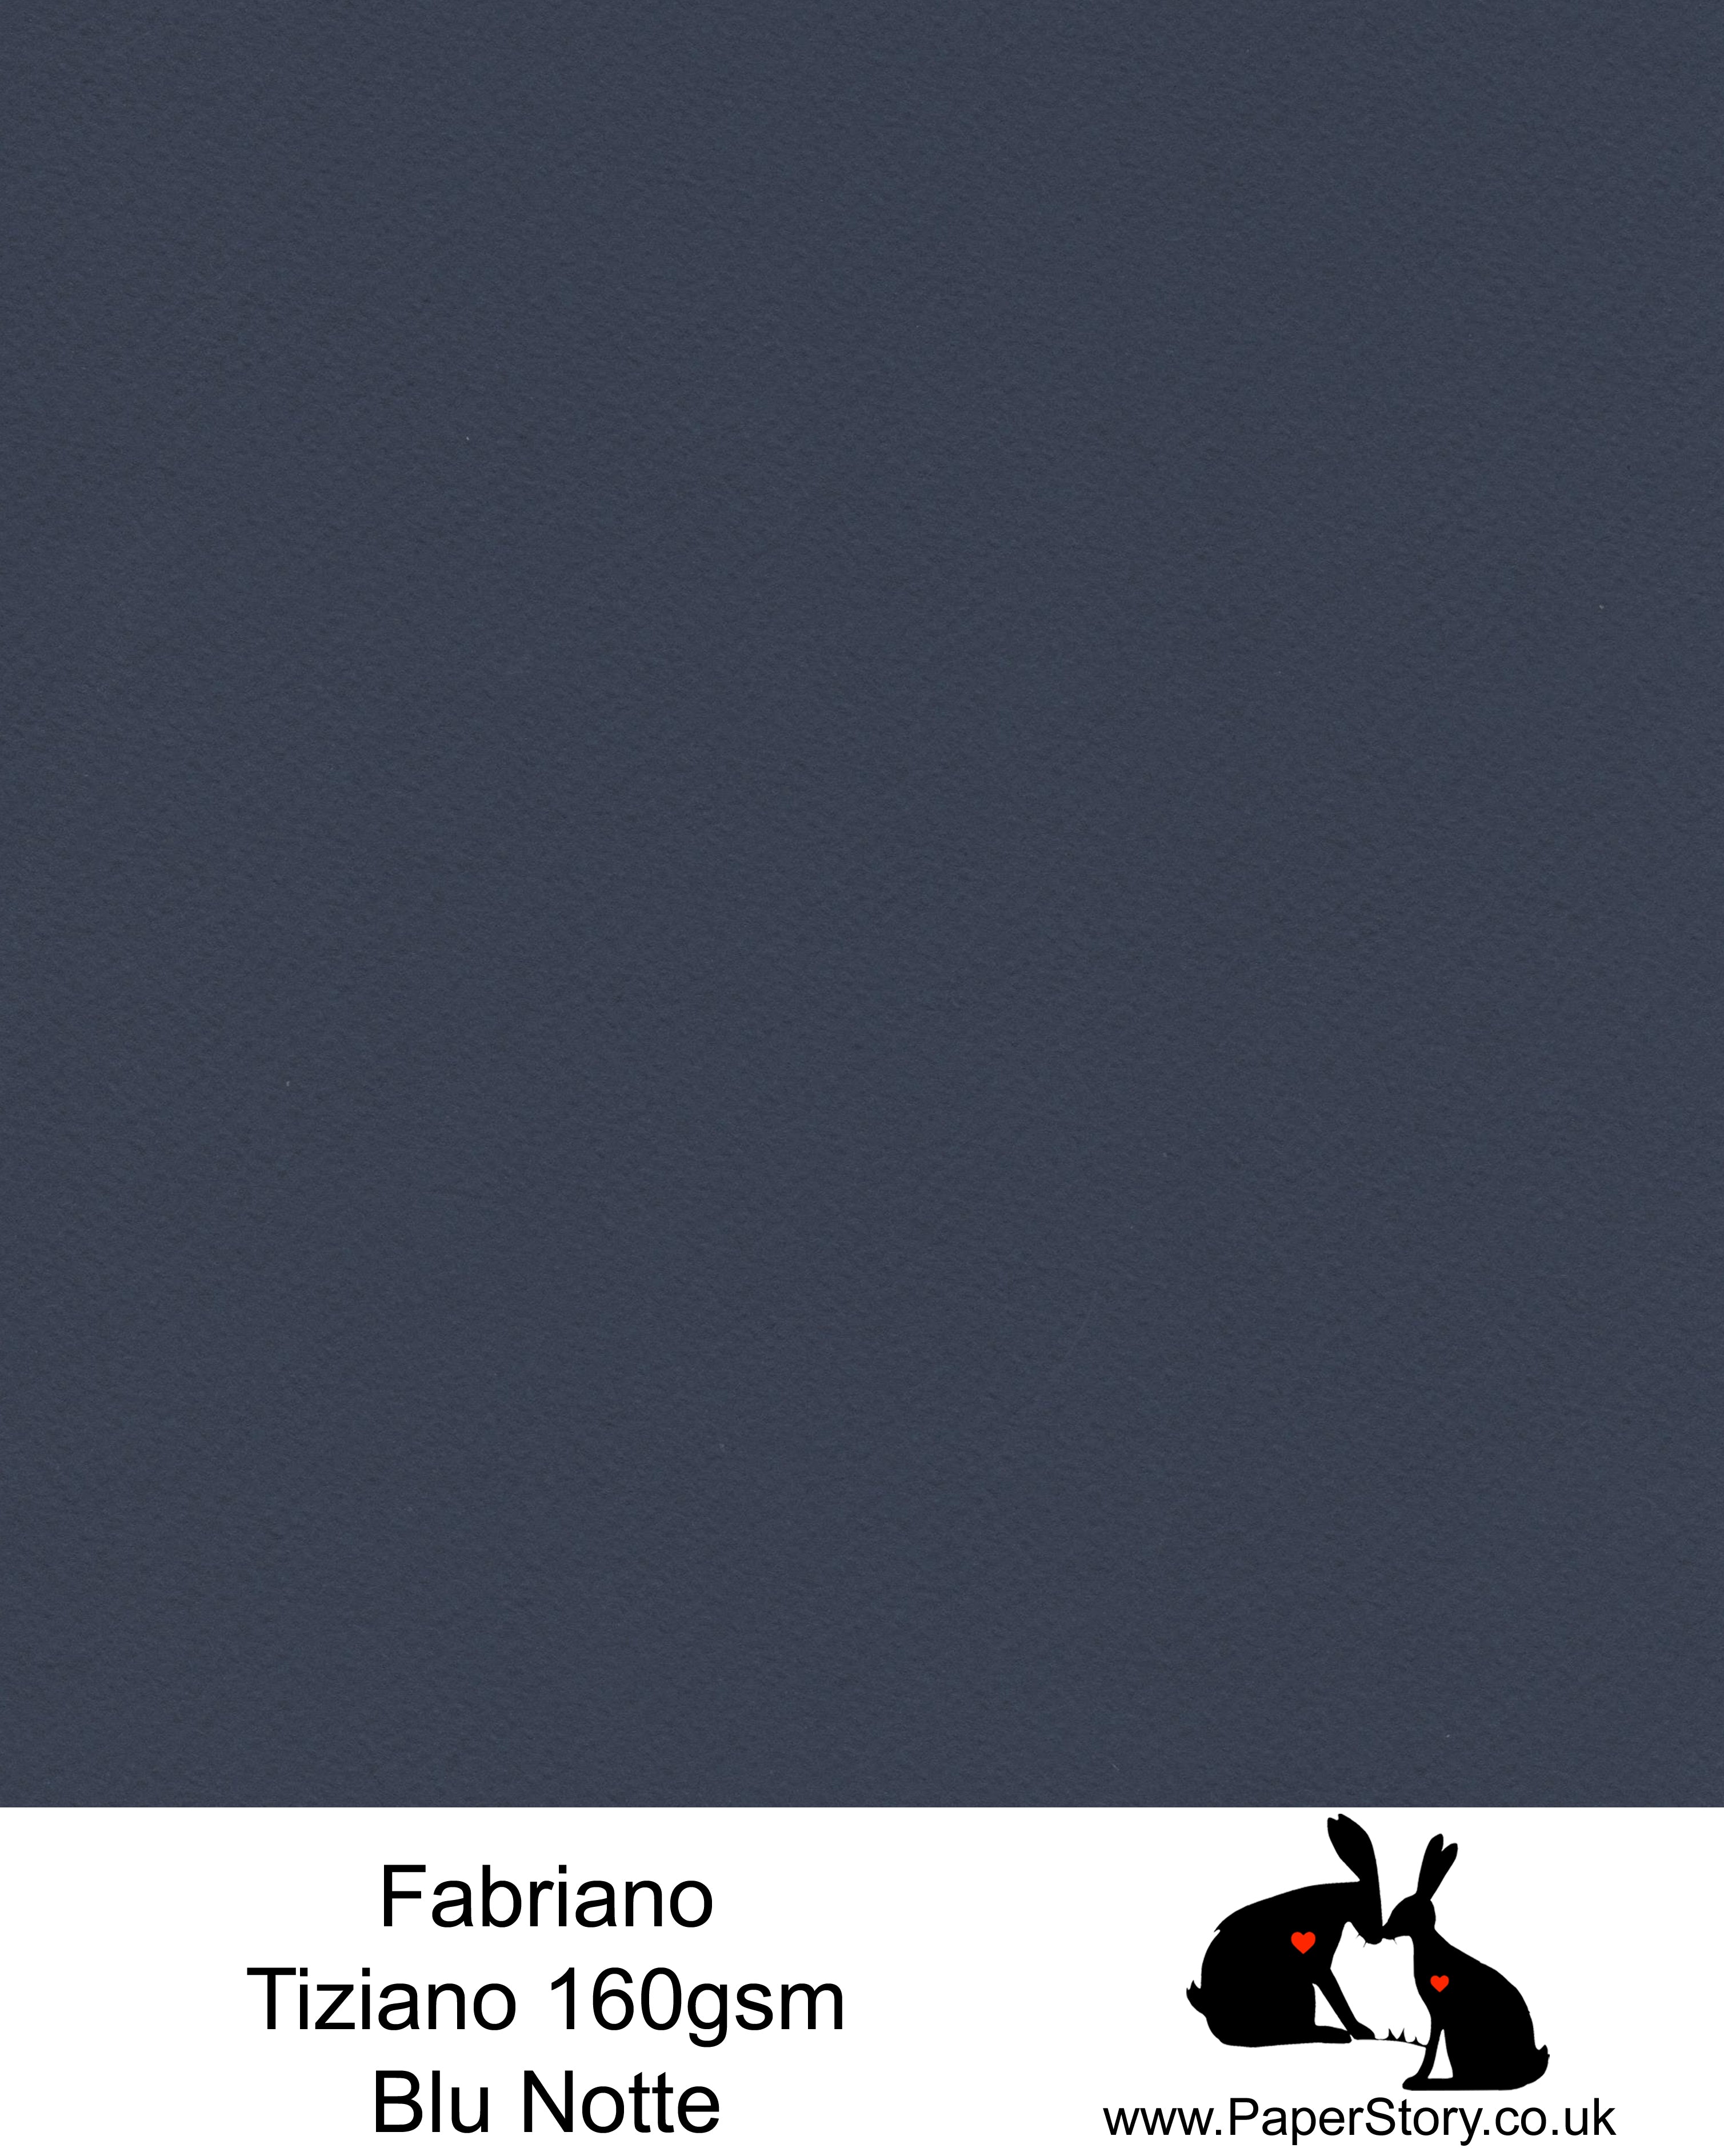 High quality paper from Italy, Blu Notte, deep midnight navy blue Fabriano Tiziano is 160 gsm, Tiziano has a high cotton content, a textured naturally sized surface. This paper is acid free to guarantee long permanence in time, pH neutral. It has highly lightfast colours, an excellent surface making and sizing which make this paper particularly suitable for papercutting, pastels, pencil, graphite, charcoal, tempera, air brush and watercolour techniques. Tiziano can be used for all printing techniques.